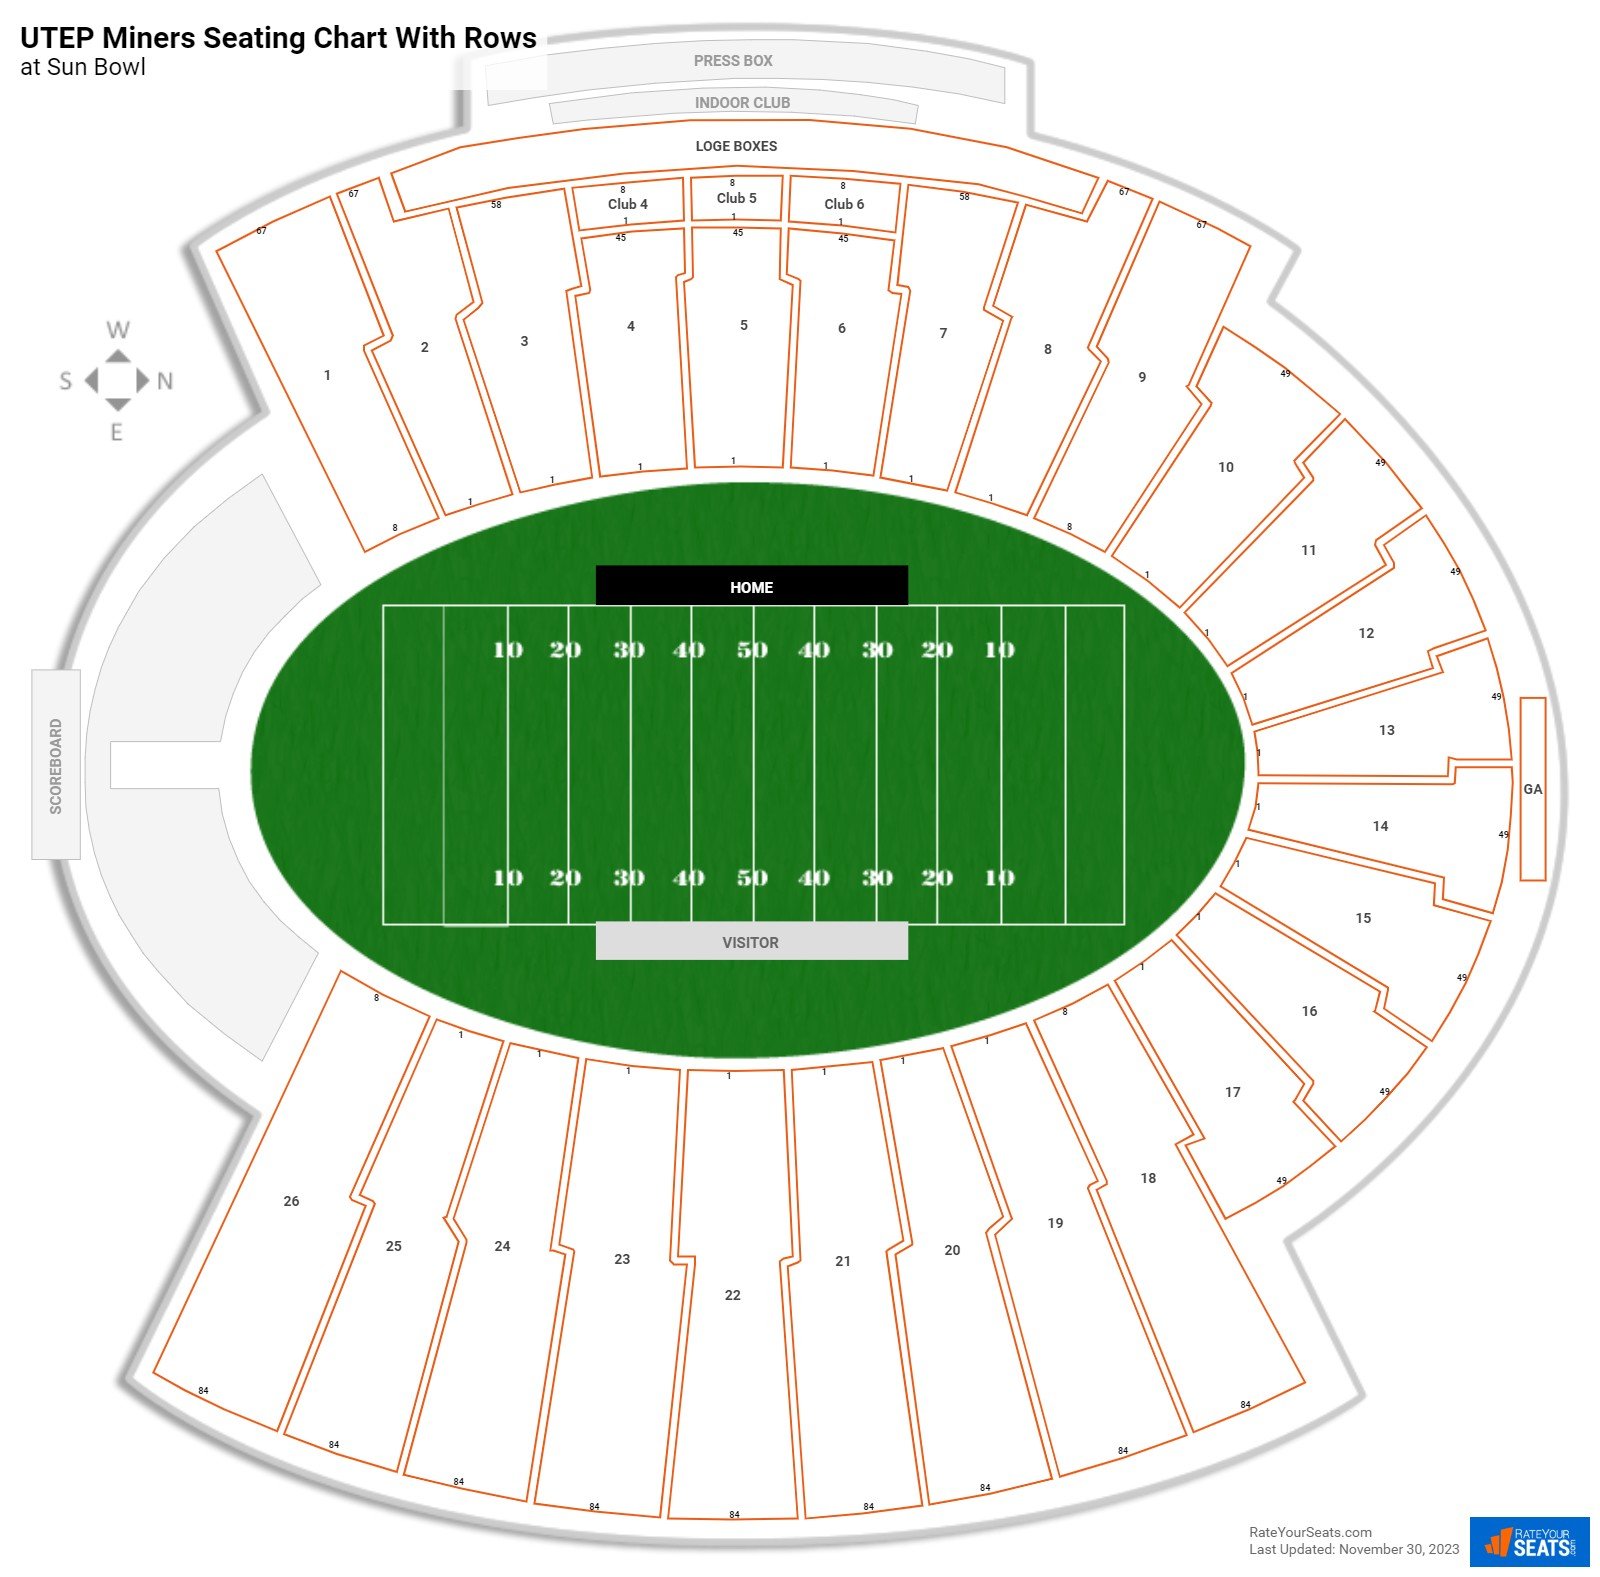 Sun Bowl seating chart with row numbers